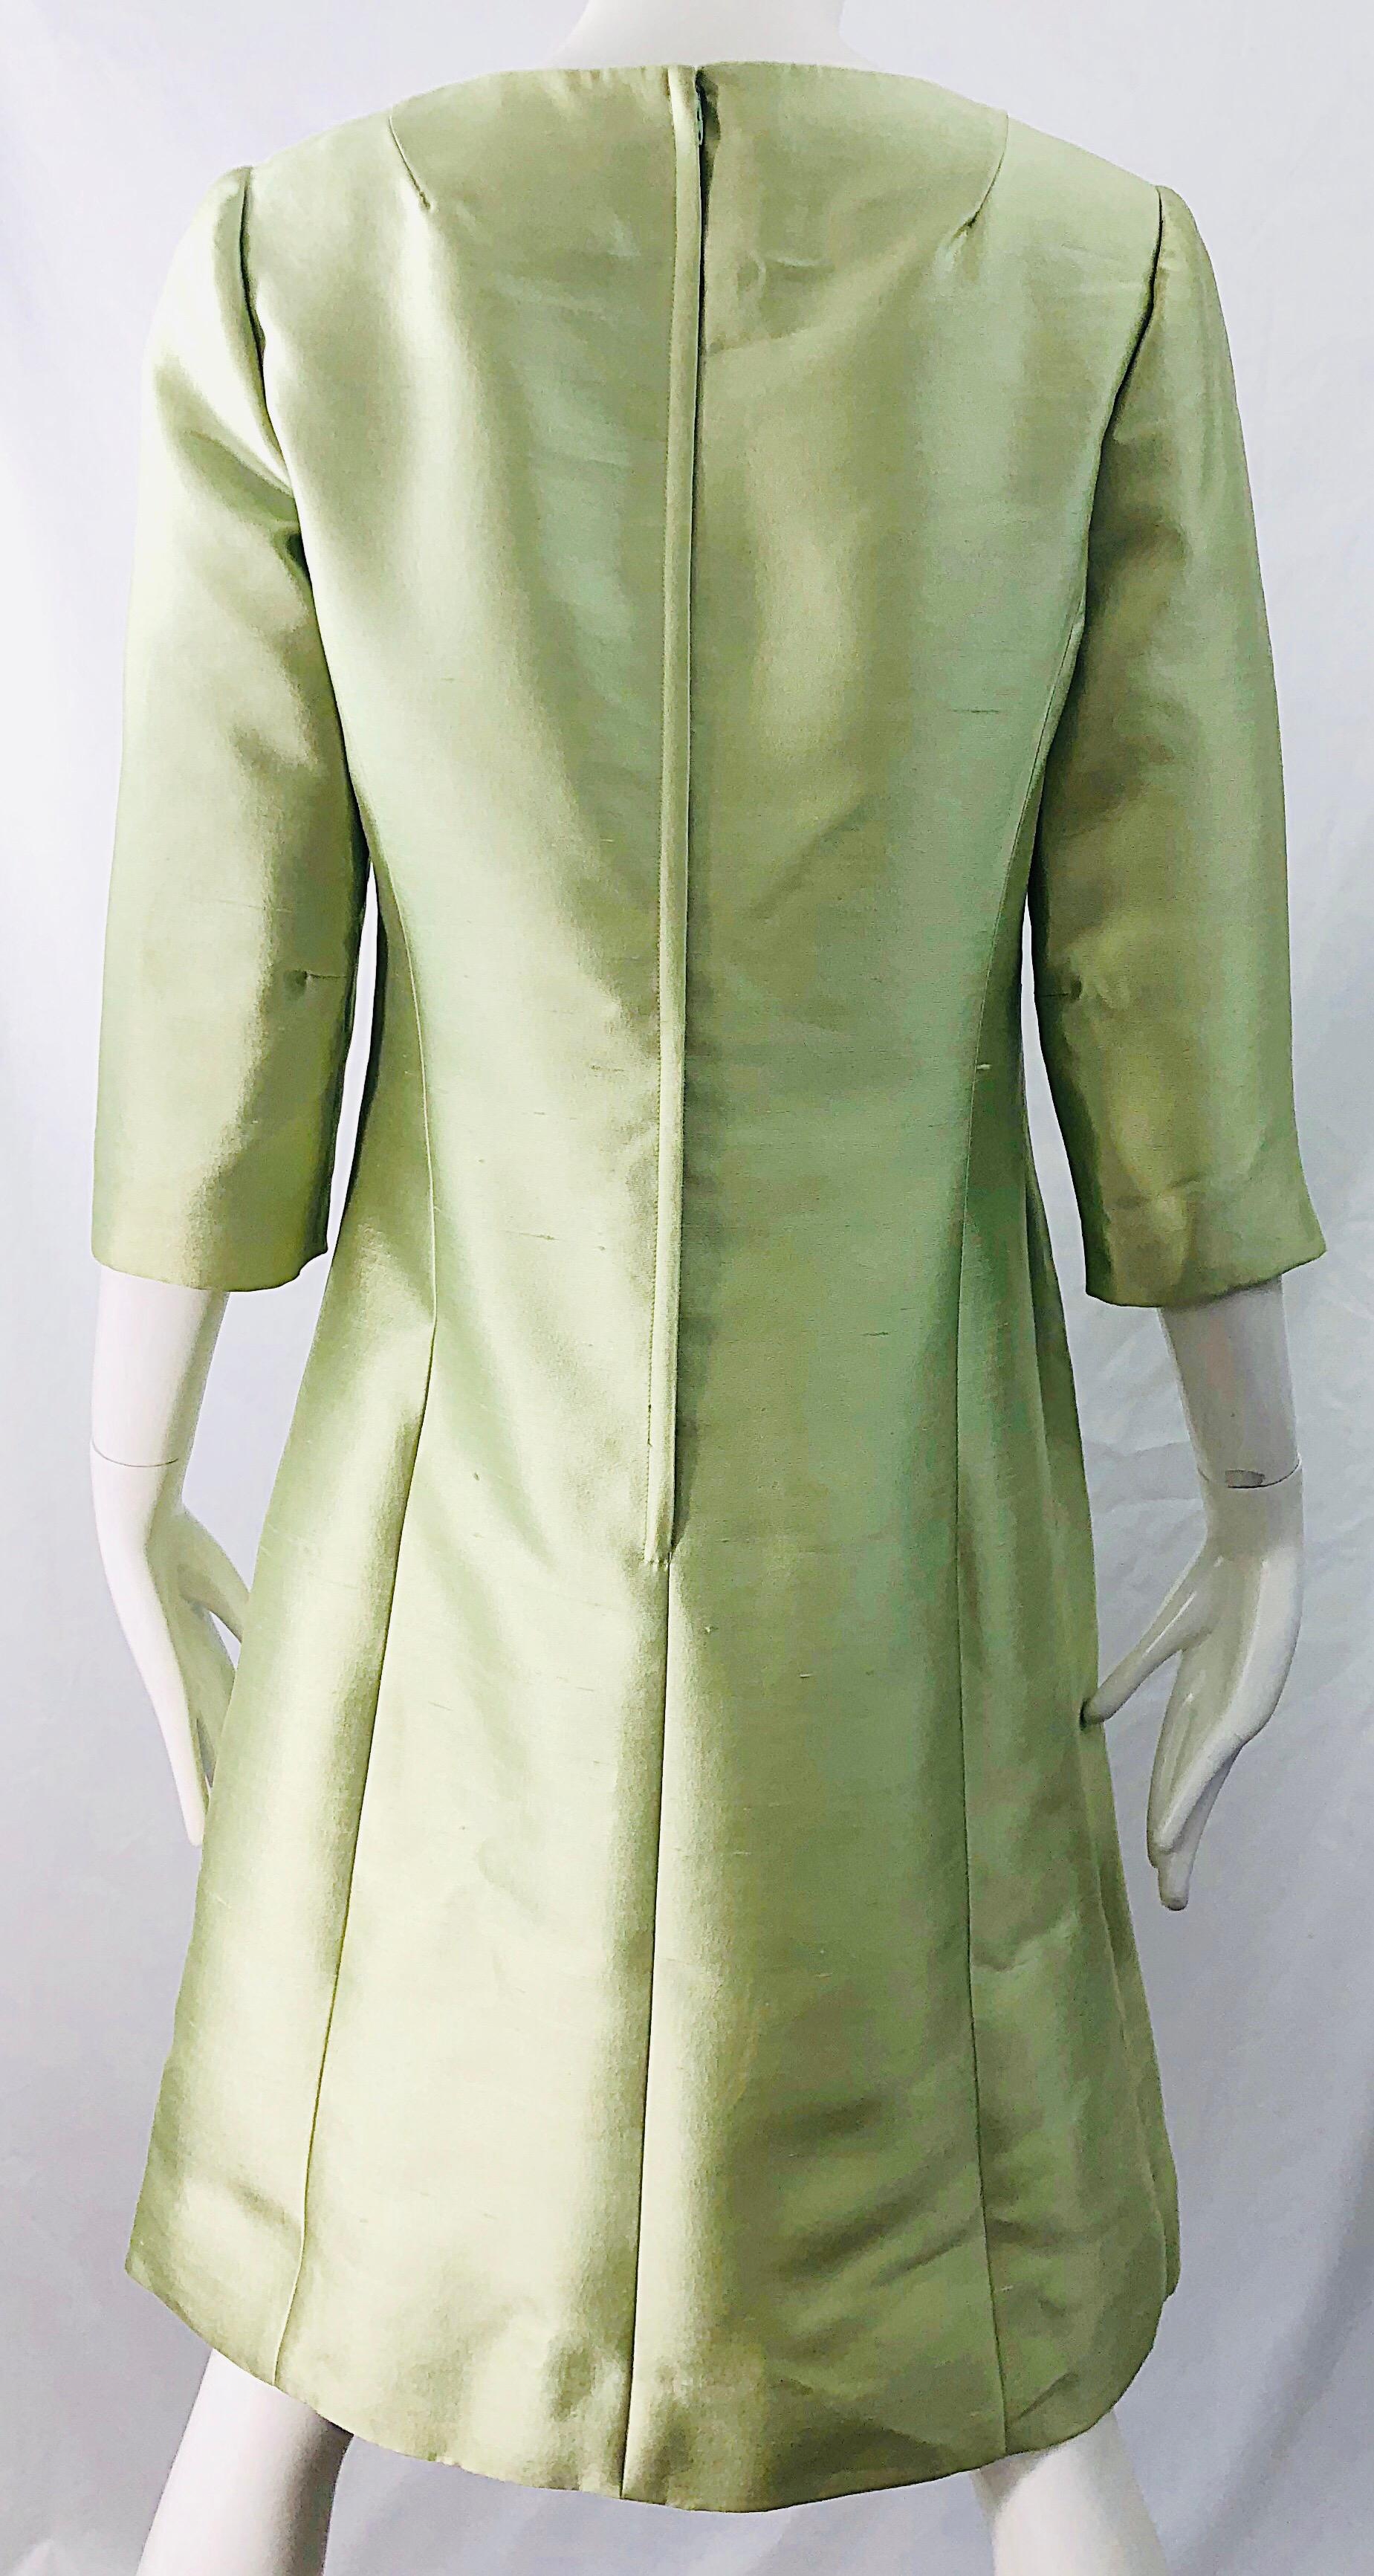 Chic 1960s Mint Green Silk Shantung Rhinestone Vintage 60s A Line Dress In Excellent Condition For Sale In San Diego, CA